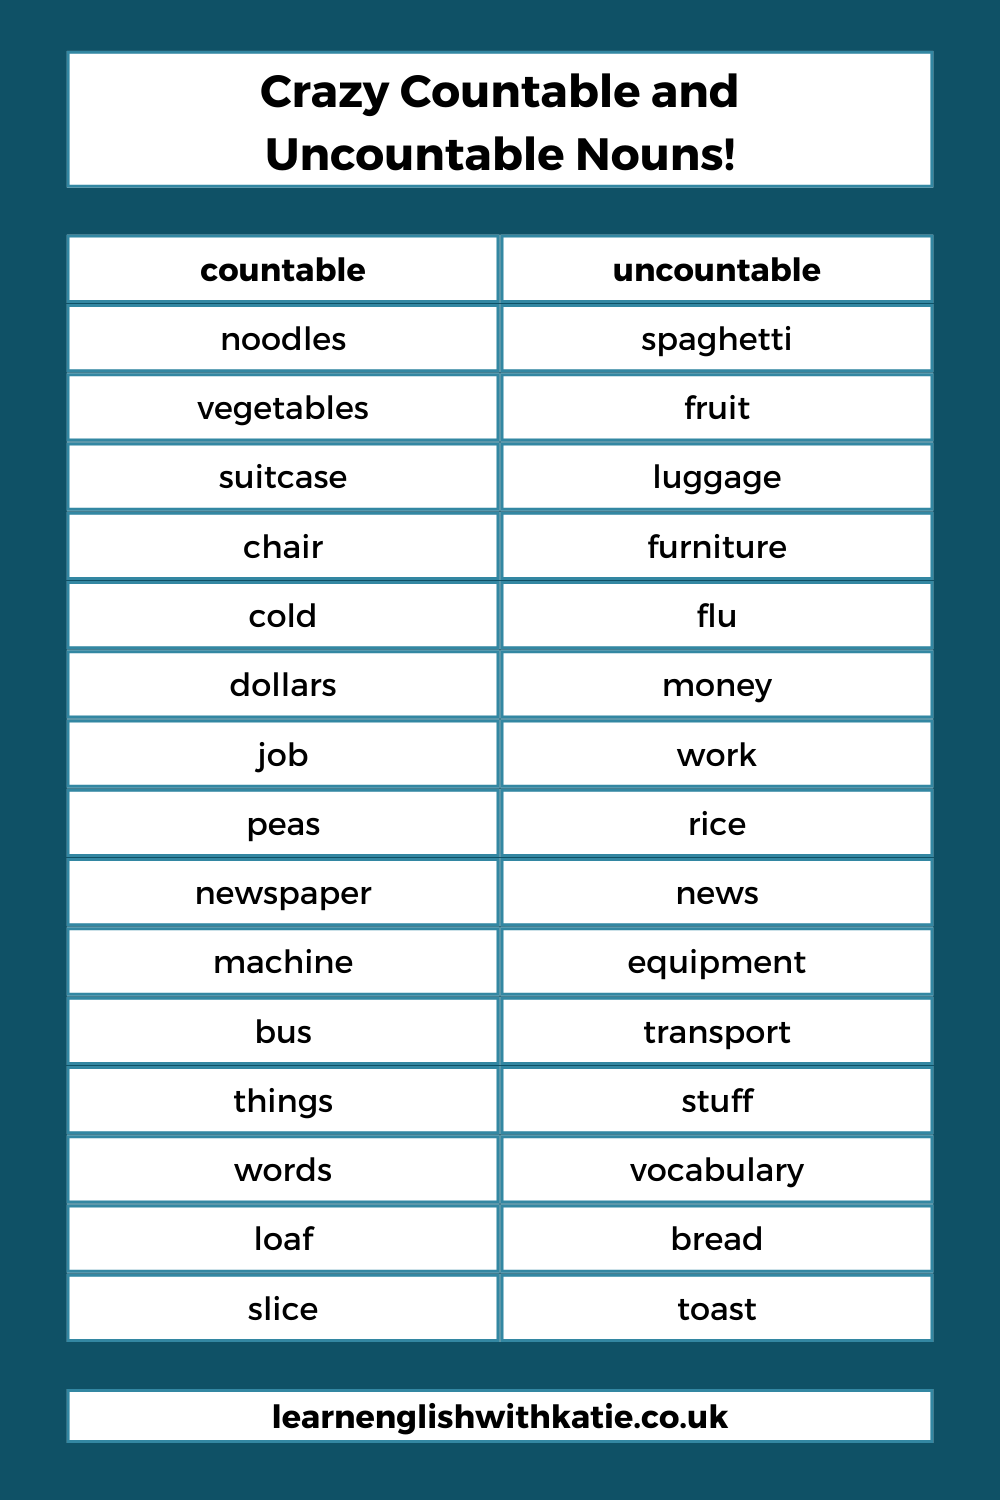 Pinterest pin listing countable and uncountable nouns from this post